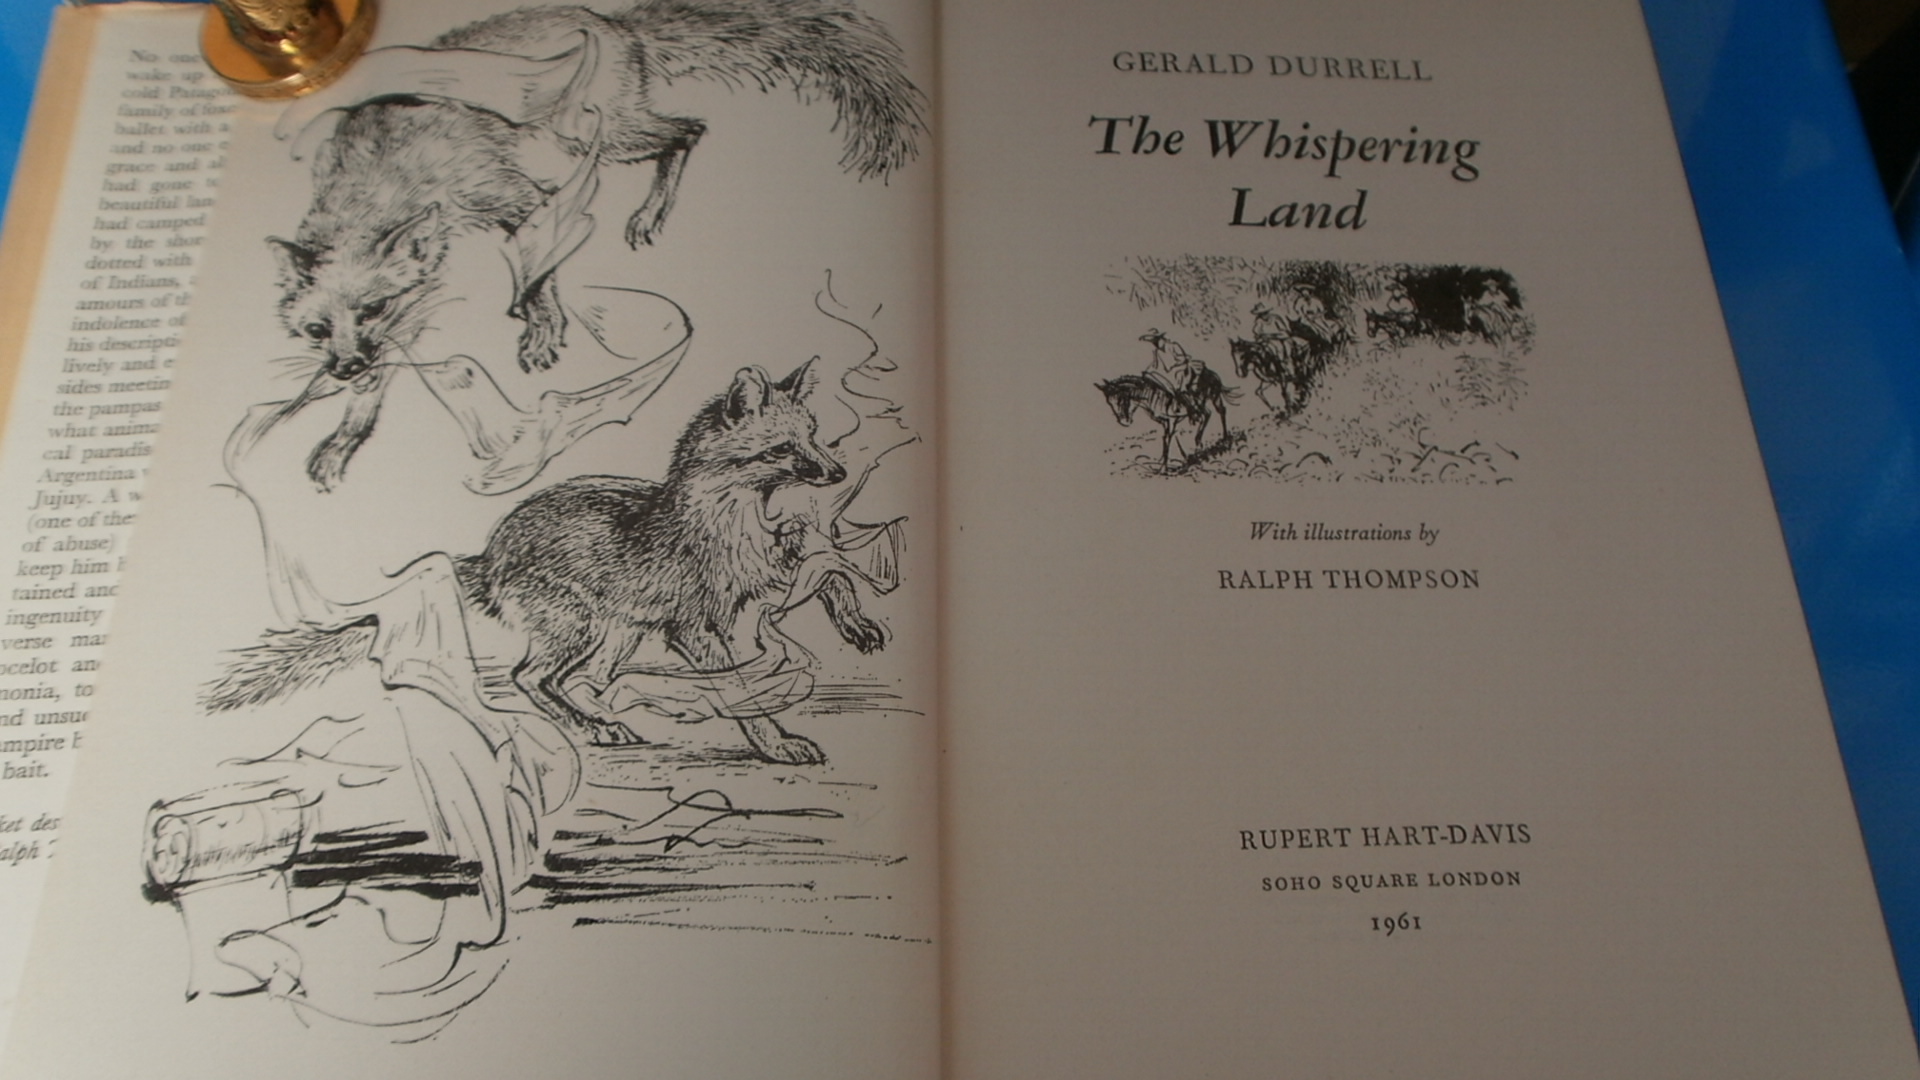 THE WHISPERING LAND BY GERALD DURRELL WITH 34 ILLUSTRATIONS